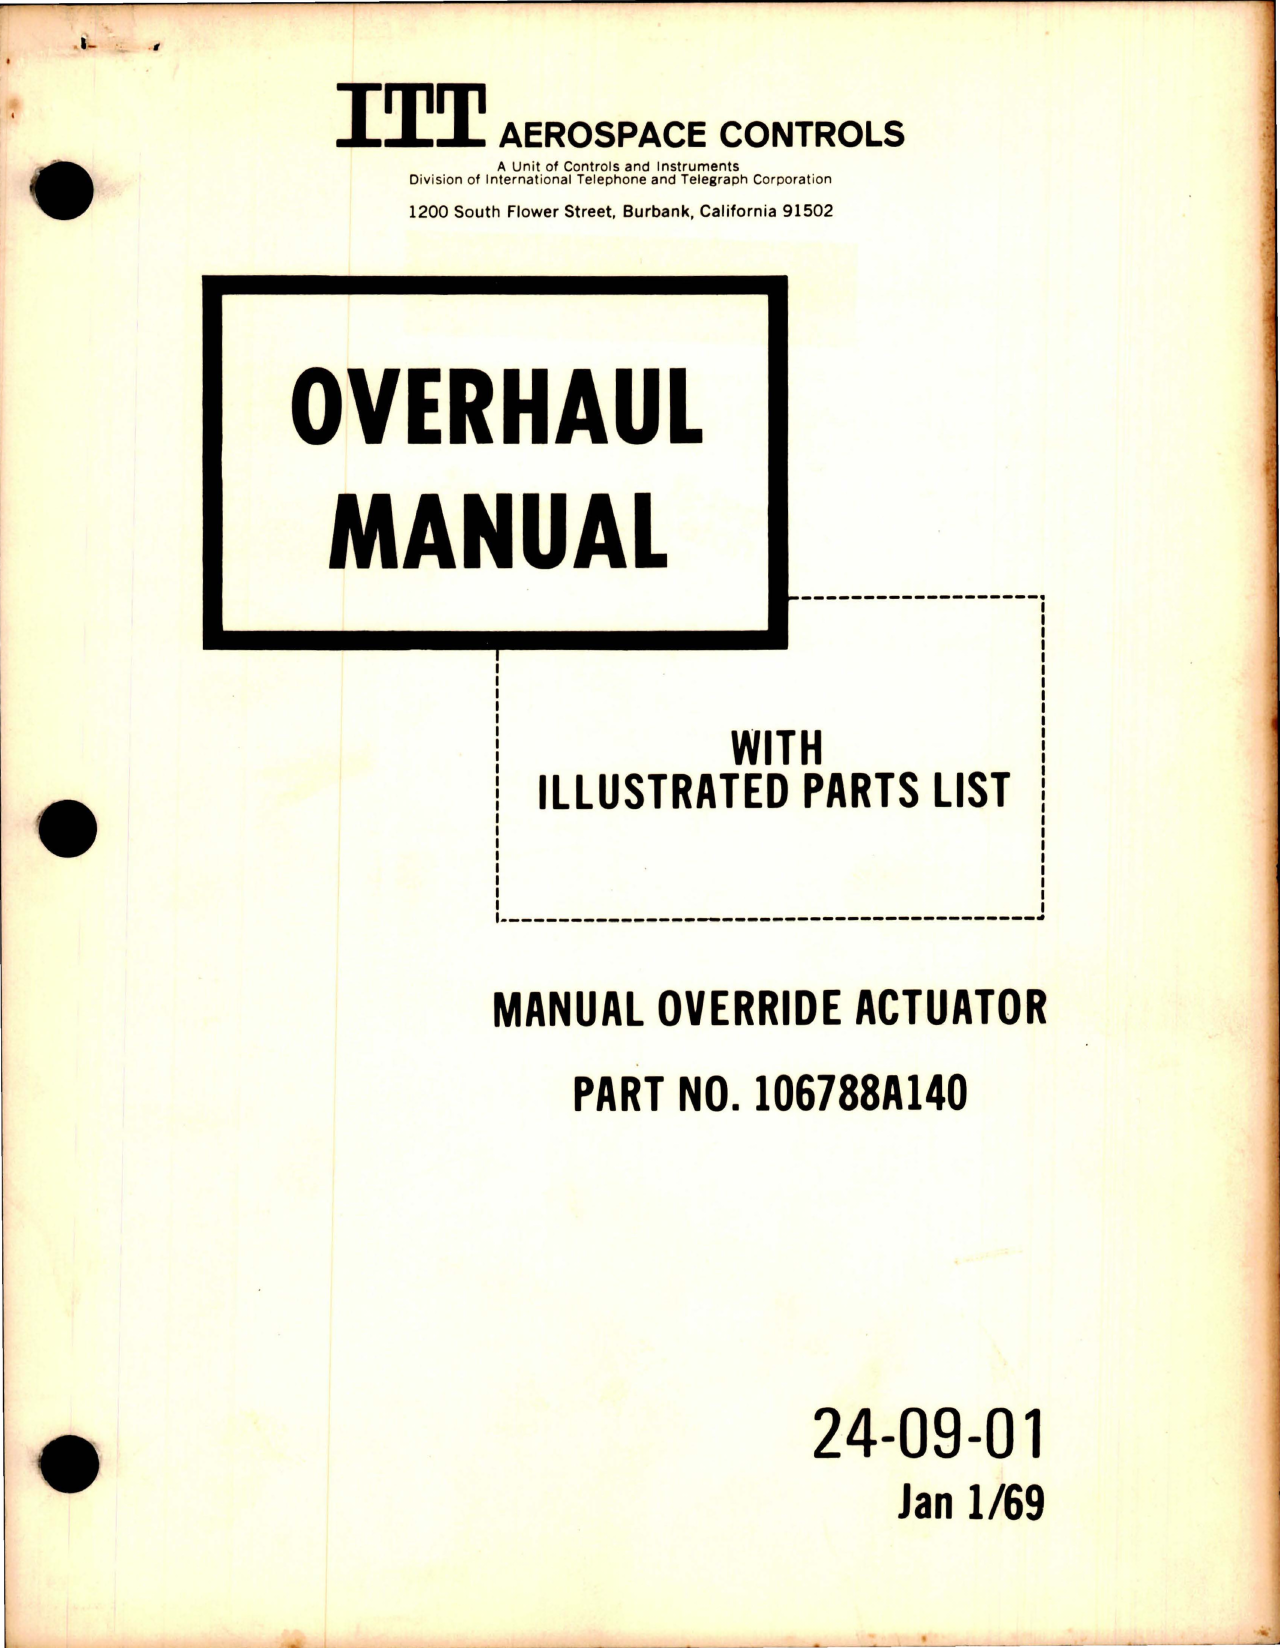 Sample page 1 from AirCorps Library document: Overhaul Instructions with Illustrated Parts List for Manual Override Actuator - Part 106788A140